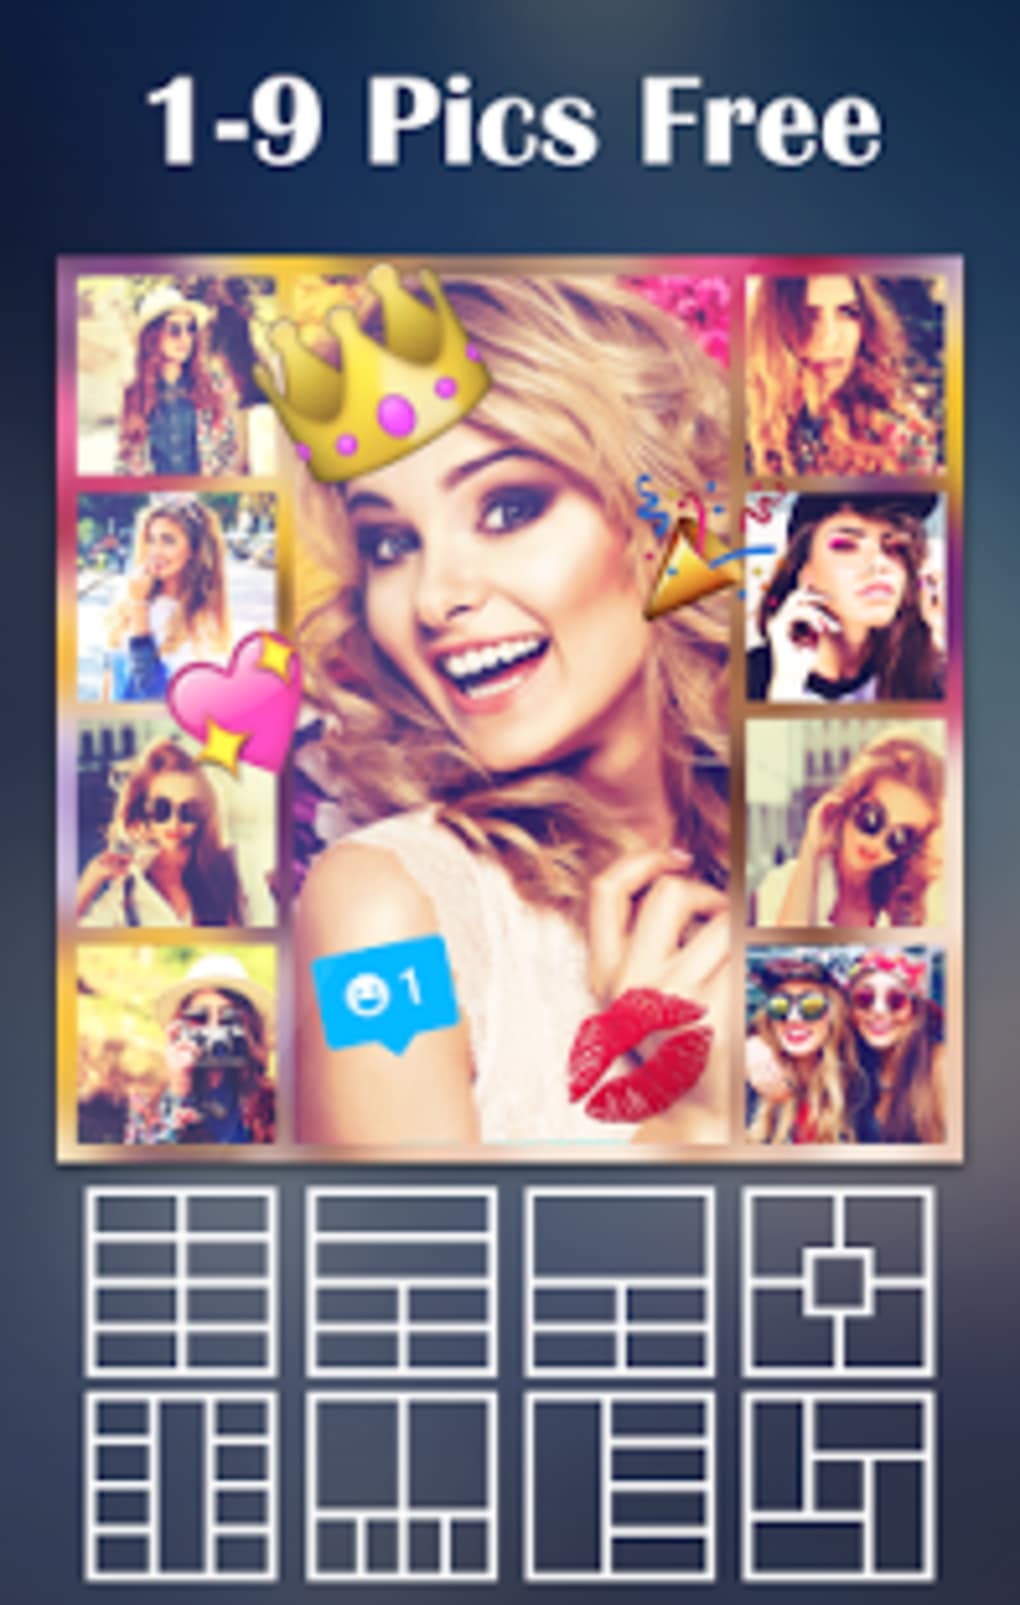 picture collage maker pro free